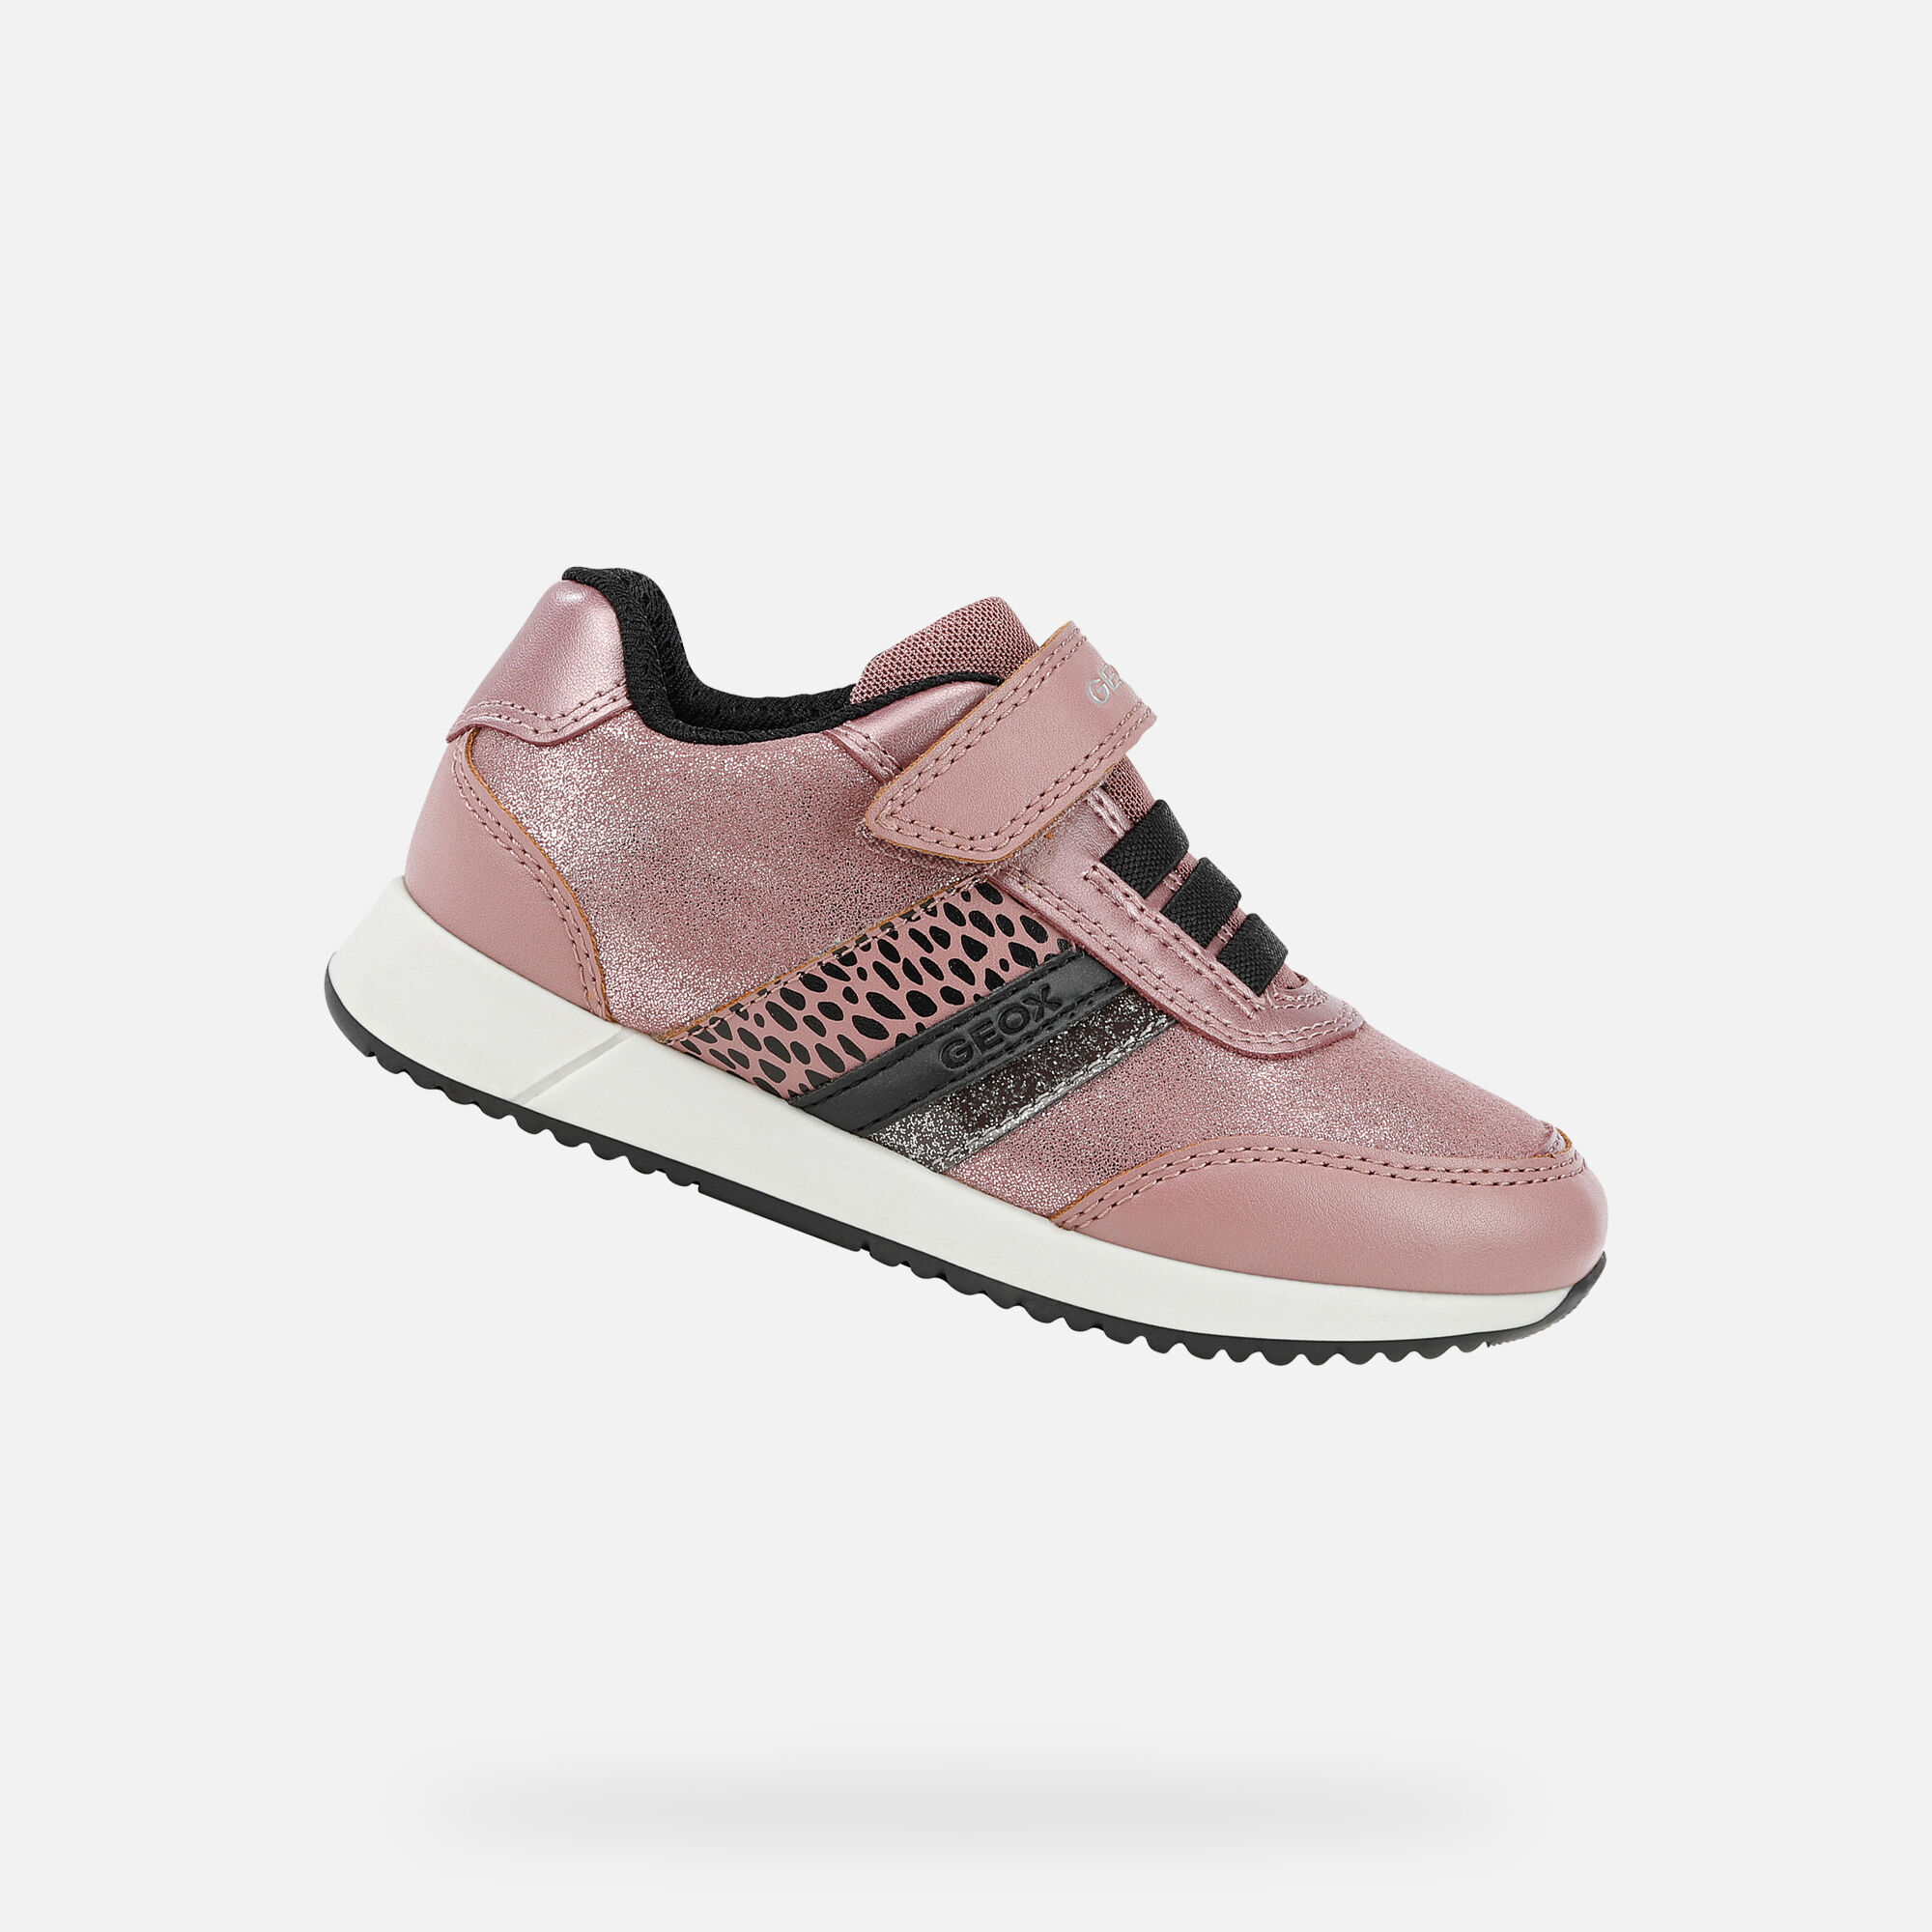 geox pink shoes